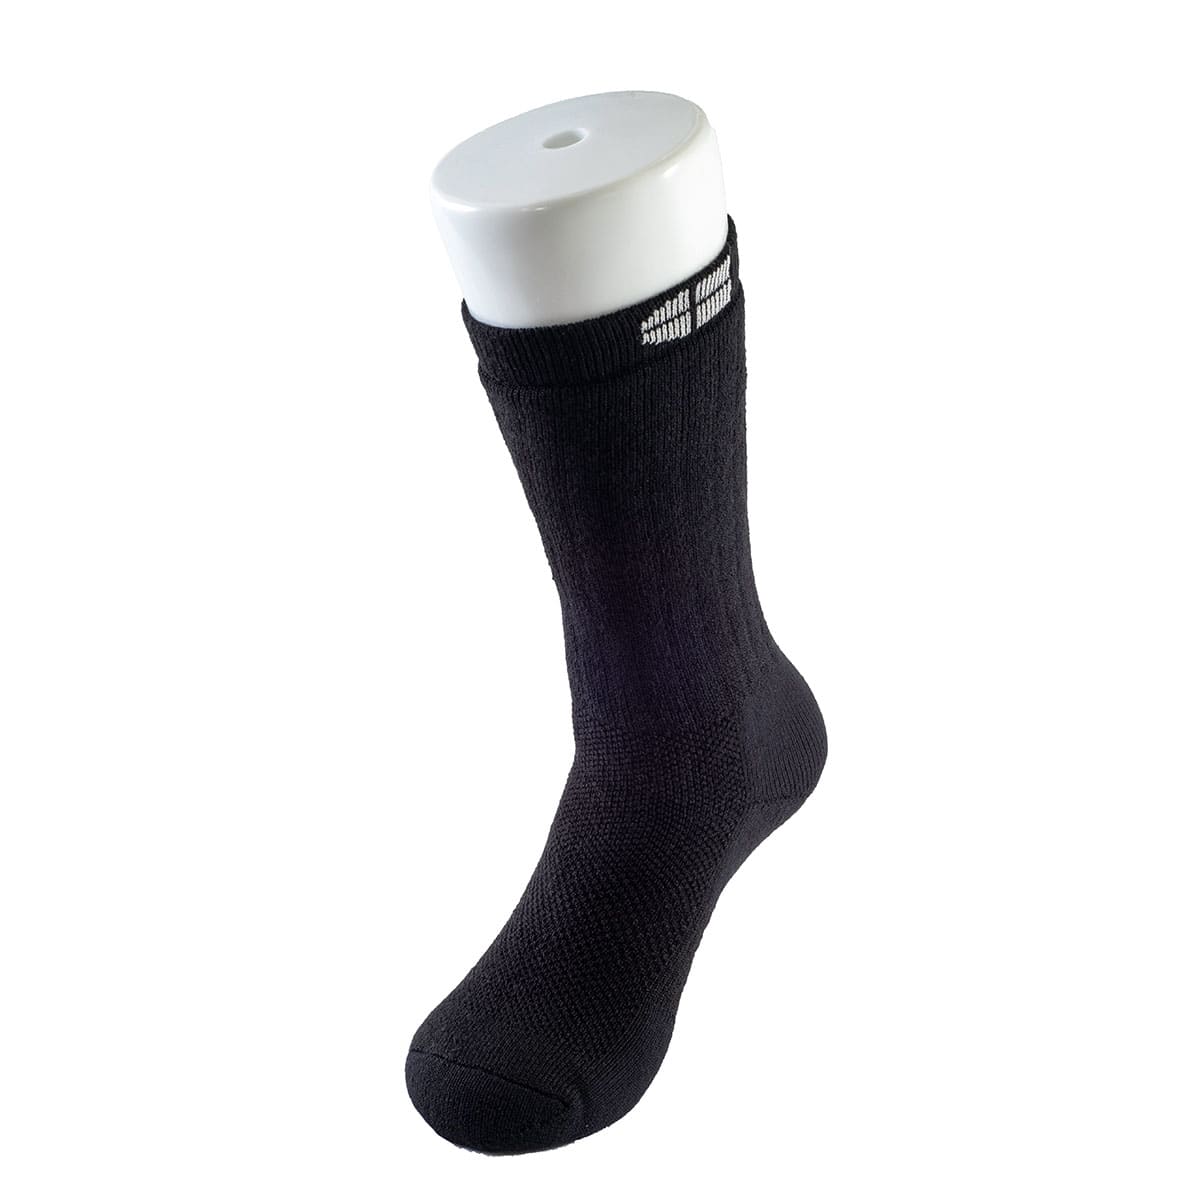 The crew sock merino from Shoes For Crews offers the perfect combination of comfort, functionality and sustainability. 